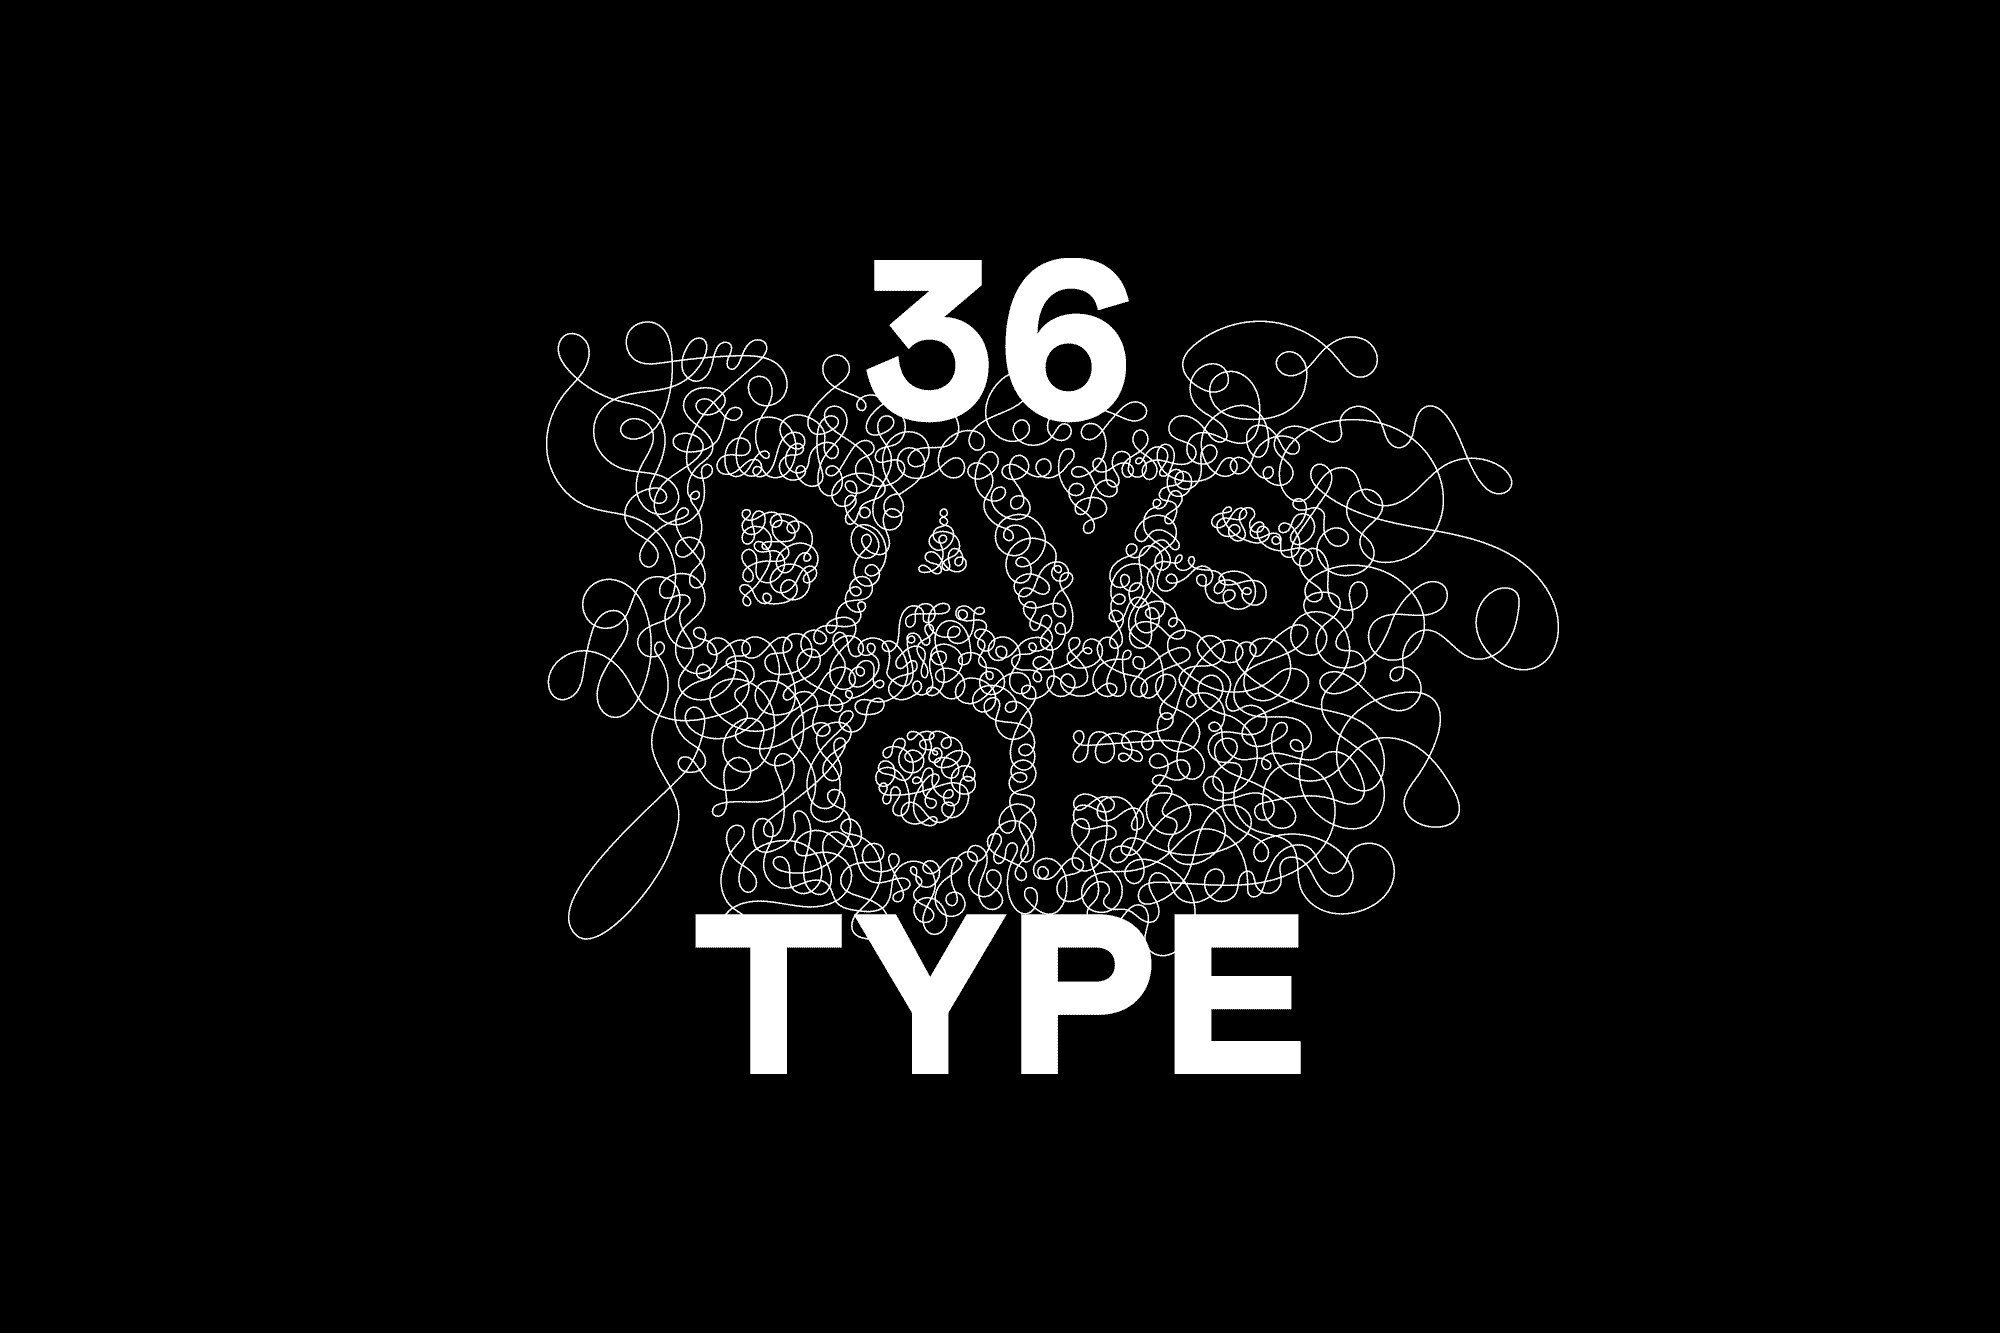 Hand drawn typography that says 36 Days of Type